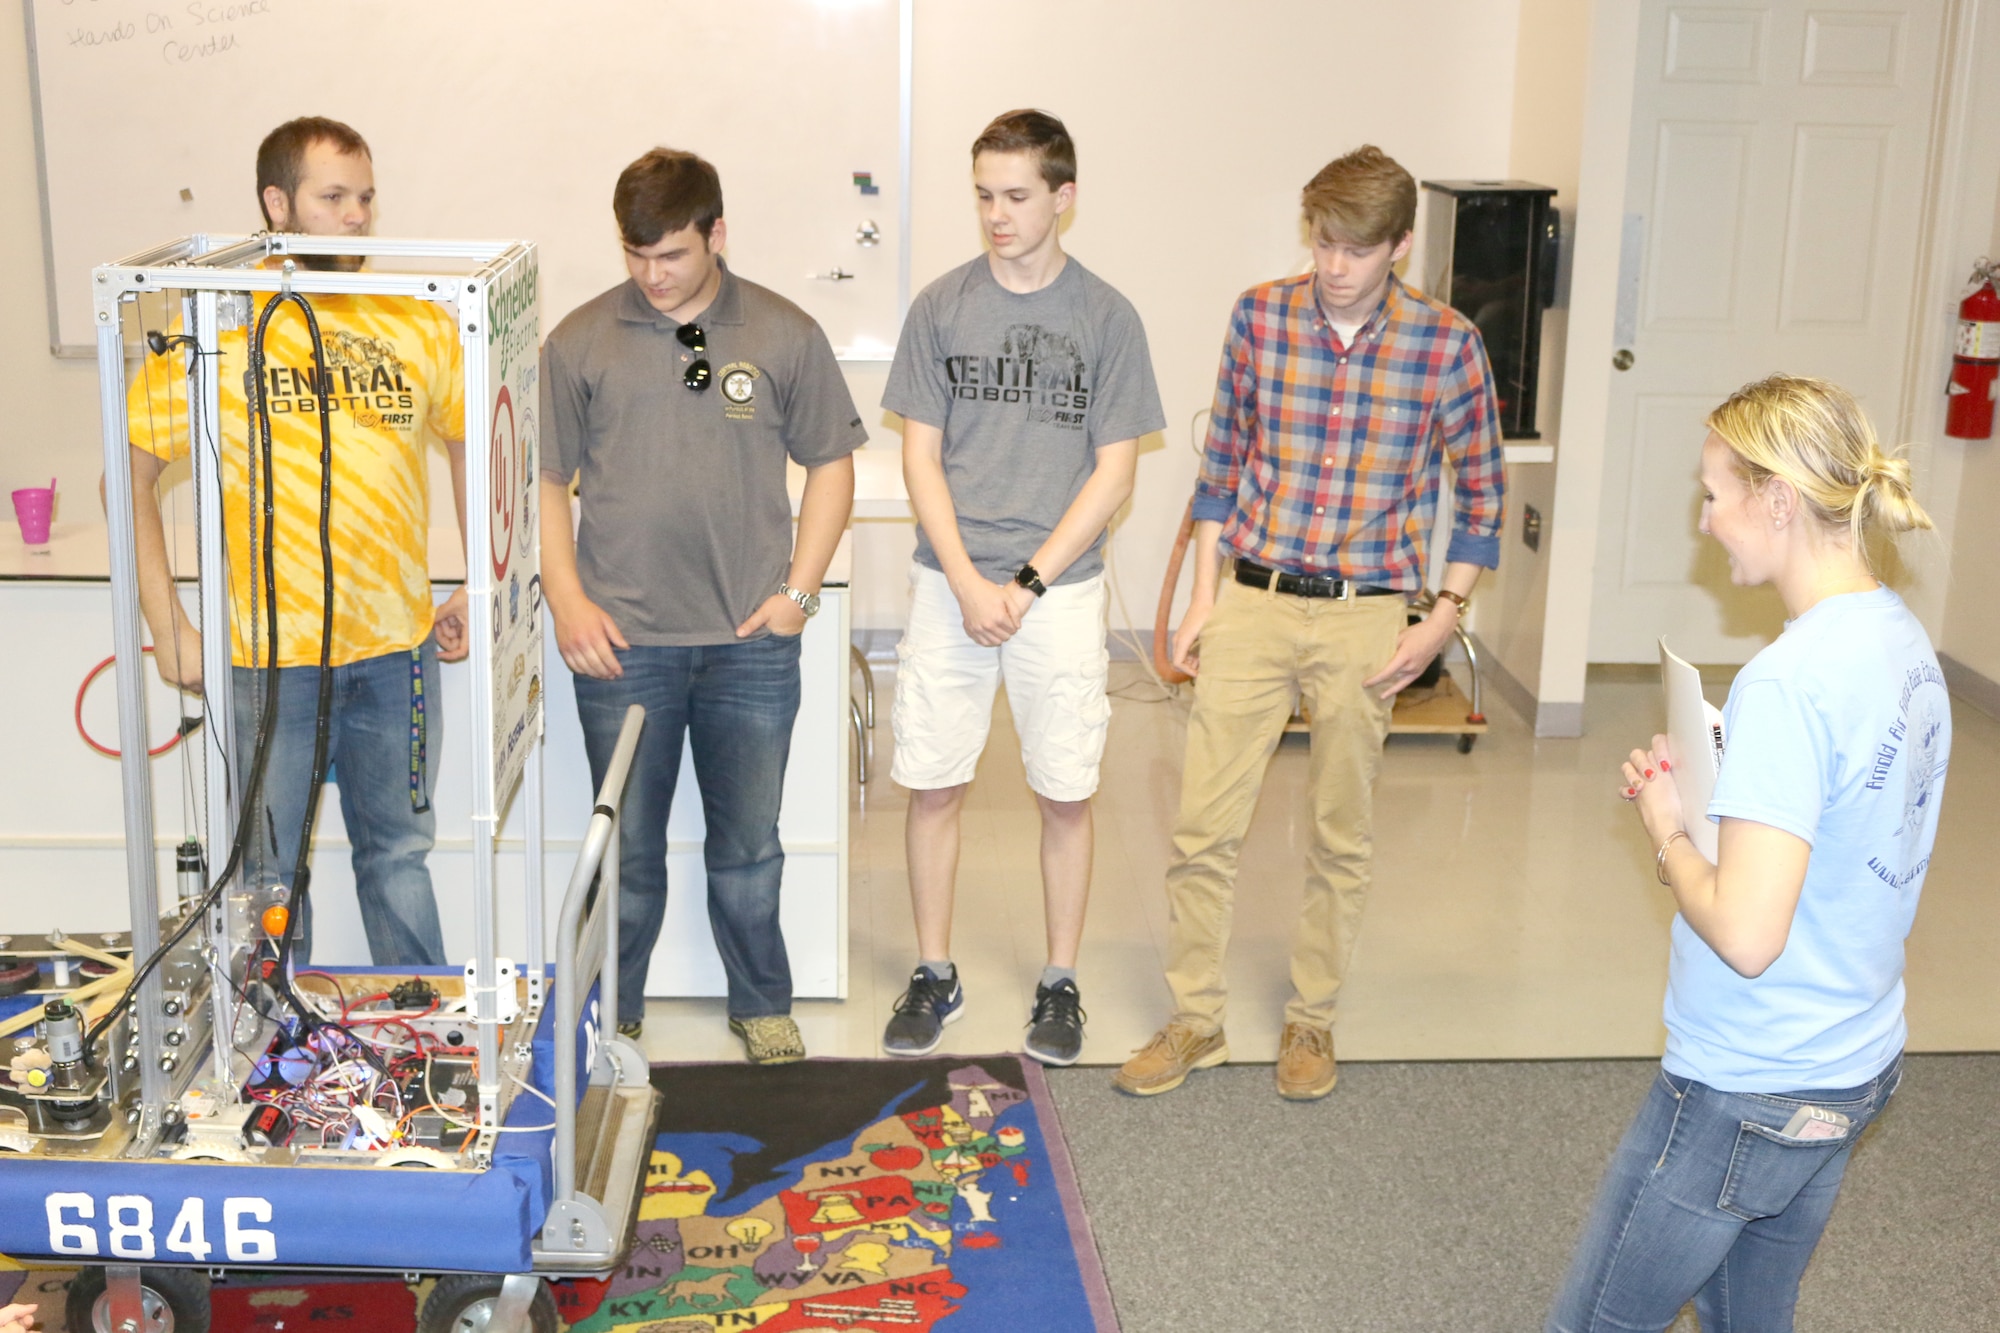 Olga Oakley, the Hands-On Science Center Air Force STEM director, at right standing, asks the Central Magnet Robotics team about their trip to the FIRST® Robotics World Championship in Houston, Texas. The Central Magnet Robotics team visited the HOSC in Tullahoma May 1 to give a demonstration. Pictured, starting left standing, are Aidan Gibson, Jimmy Jones, David Schafer, Drew Dove, Marc Guthrie, Olga Oakley, Maddy Perrien and Ethan Davenport. (U.S. Air Force photo/Deidre Ortiz)